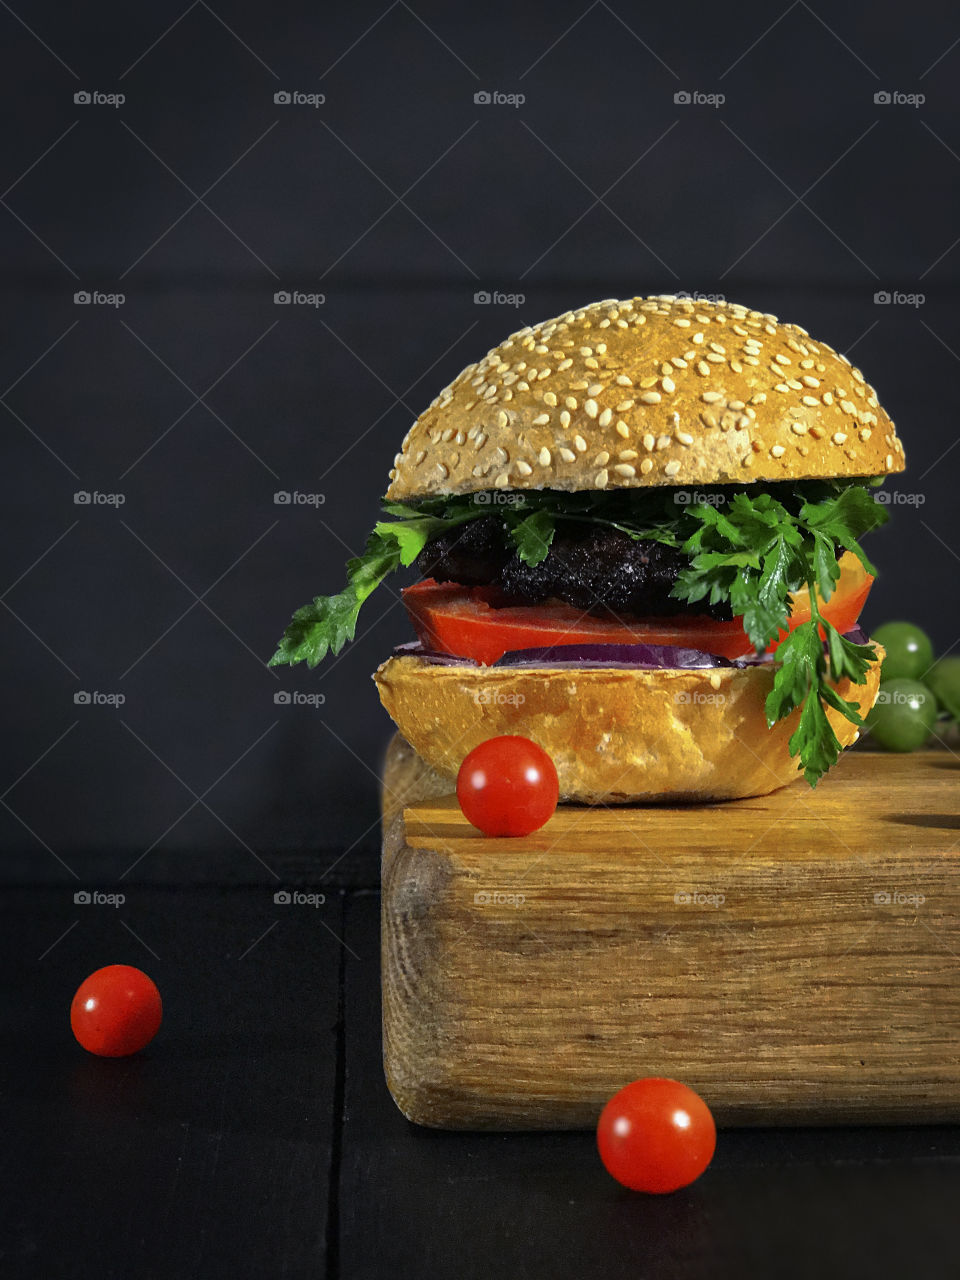 delicious hamburger with bun, served on the board with a small red cherry tomatoes